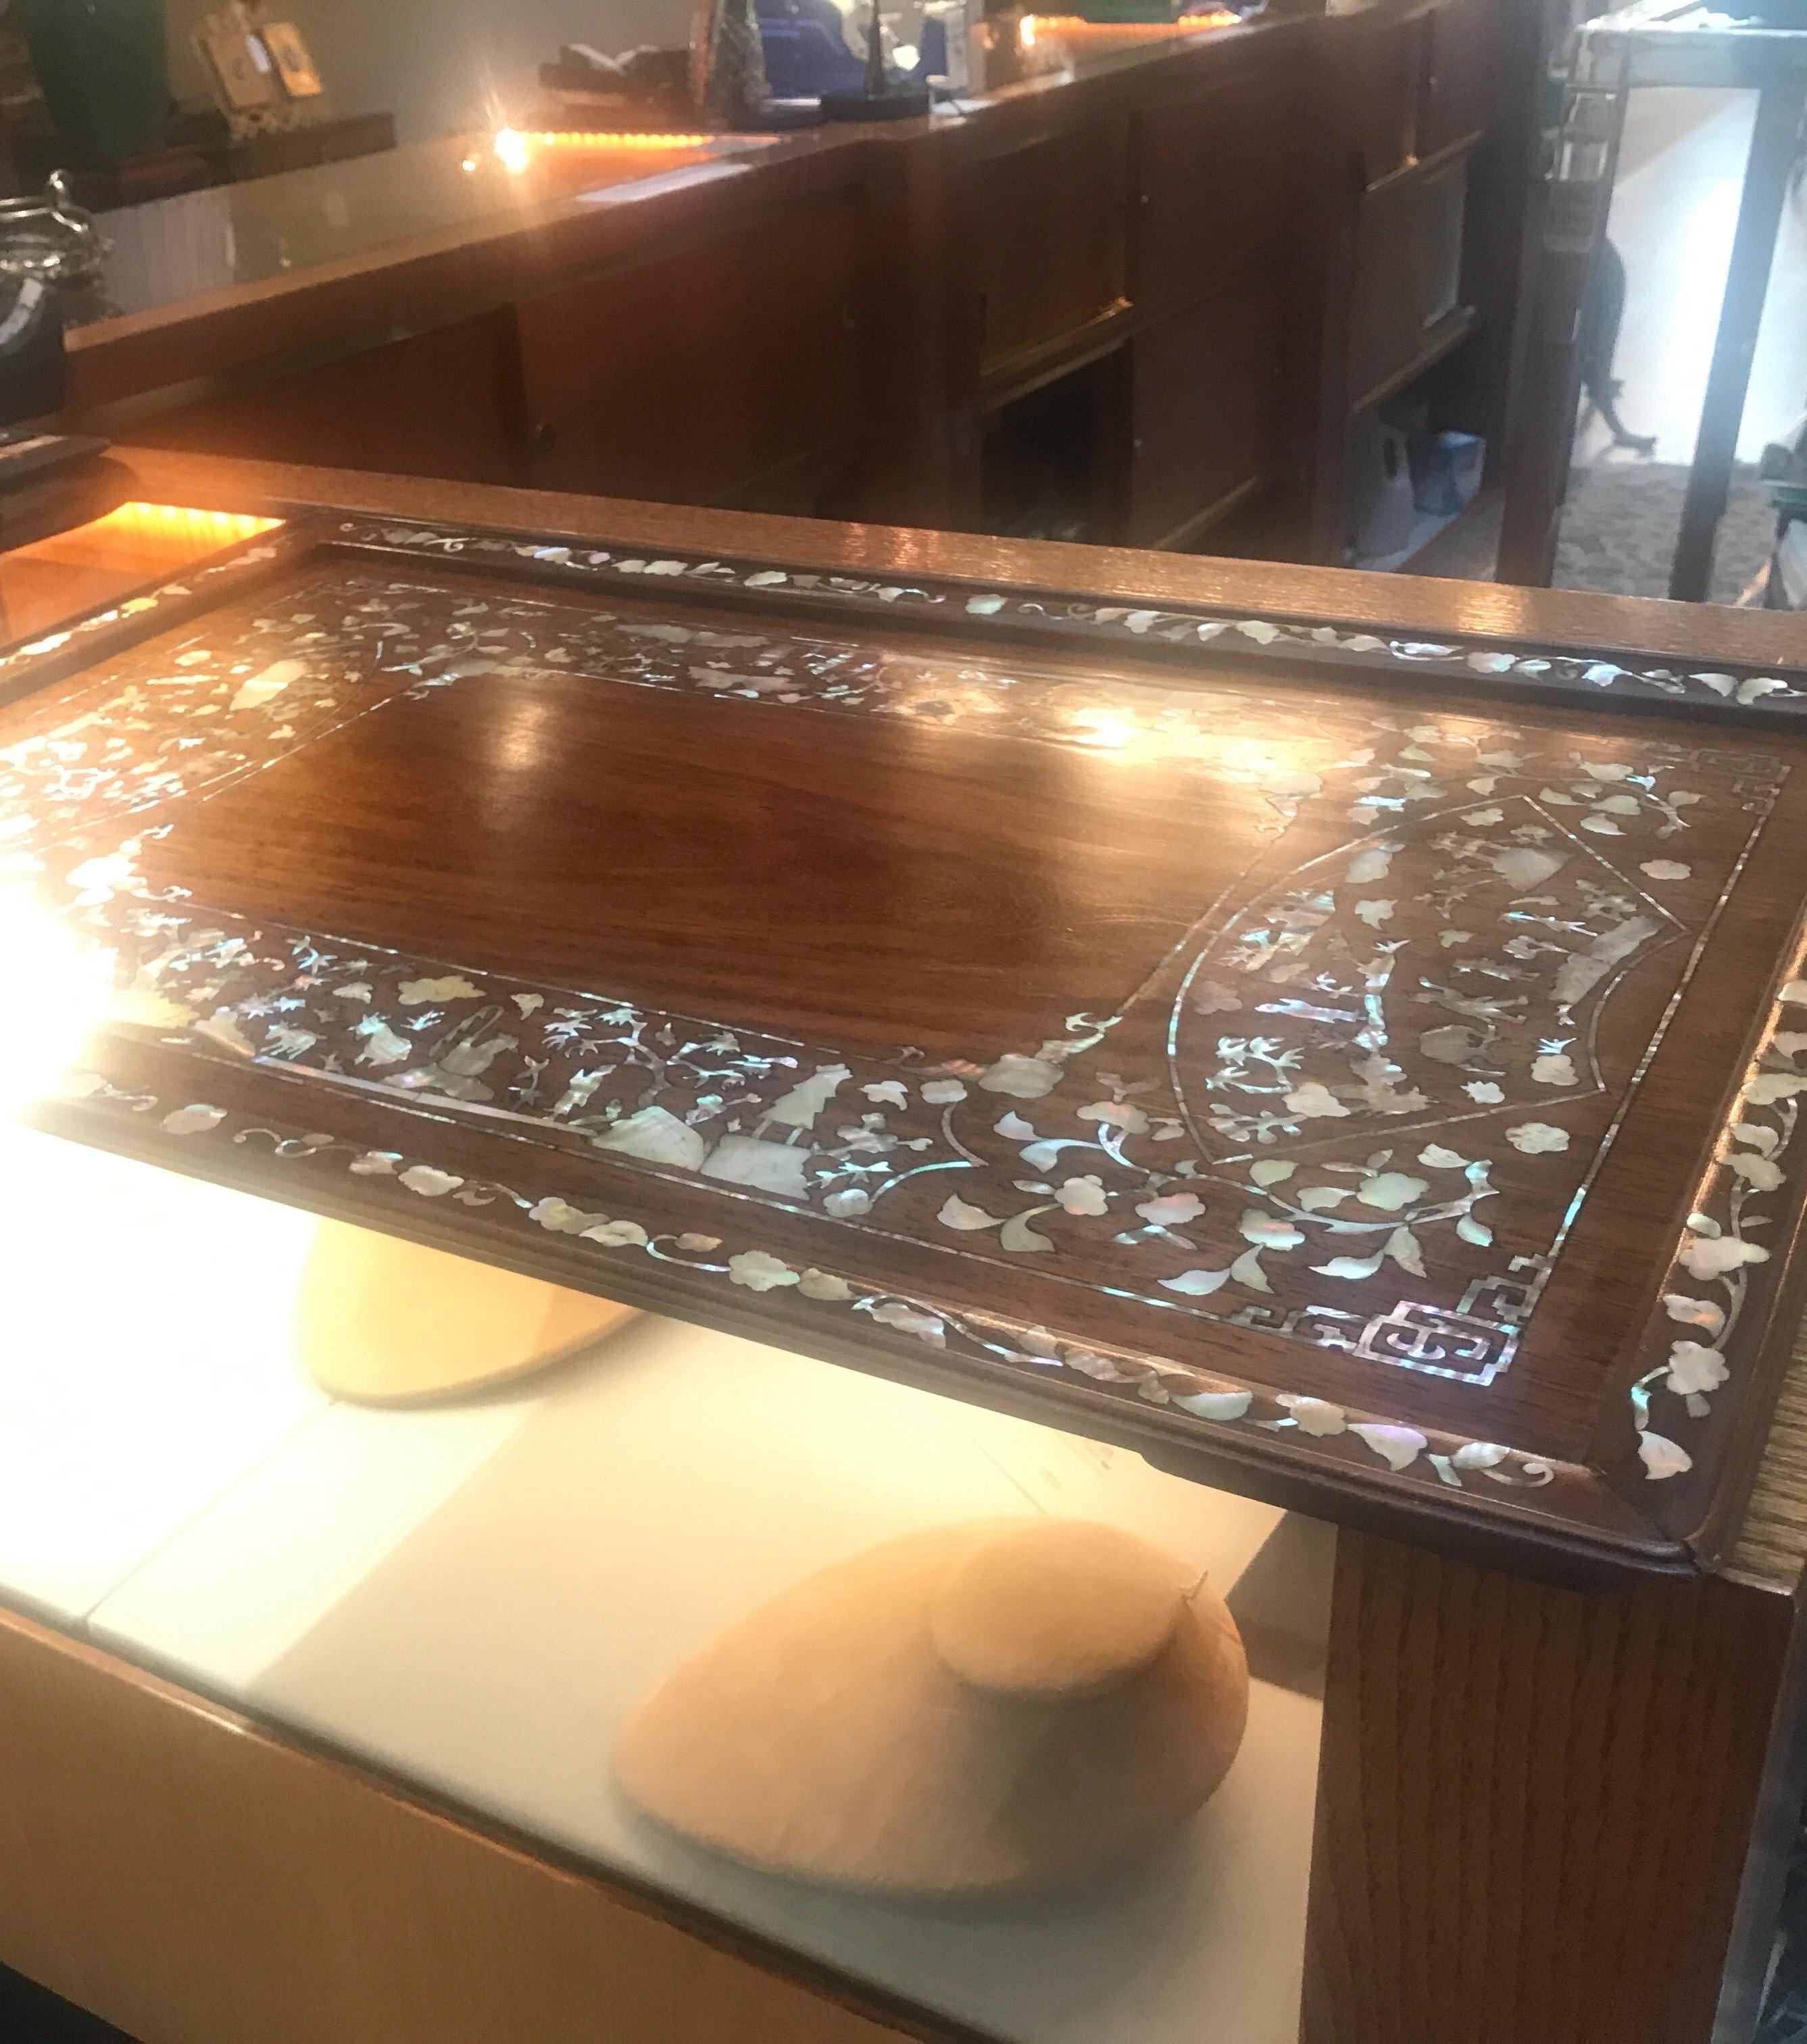 Exceptional antique Chines Export rosewood tray with hand inlaid mother of pearl. The square tray with intricate inlay all around the border, with raised inlaid edge. Well cared for condition with a recent French polish to clean any mars and scuff.